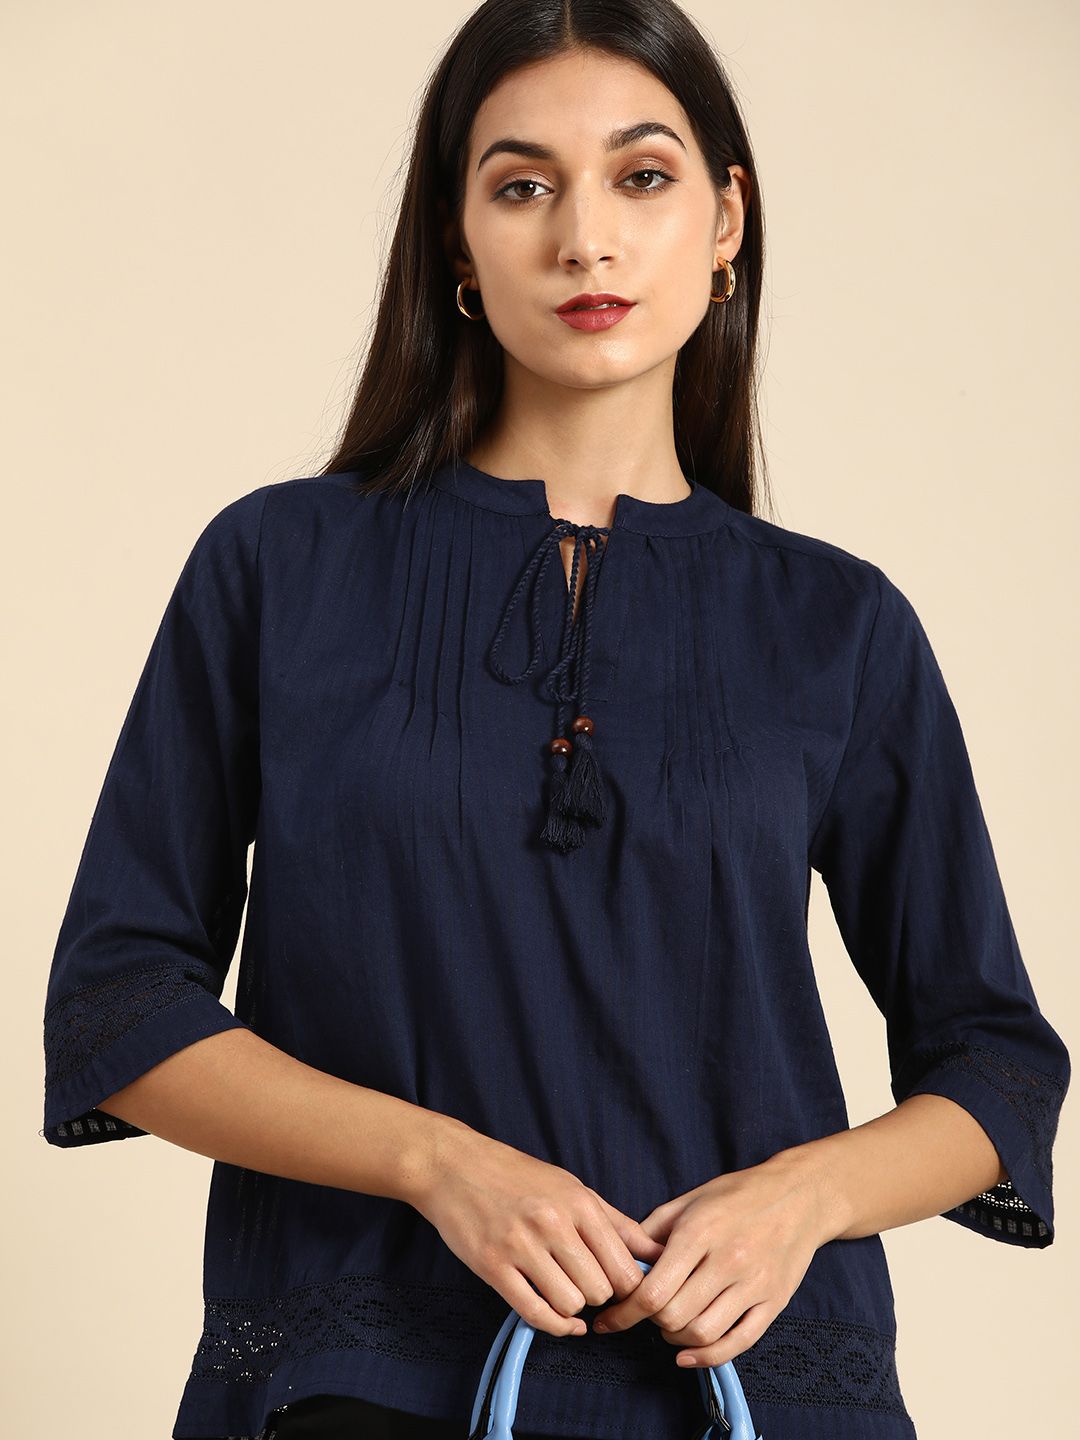 all about you Navy Blue Self-Striped Pure Cotton Tie-Up Neck Top Price in India